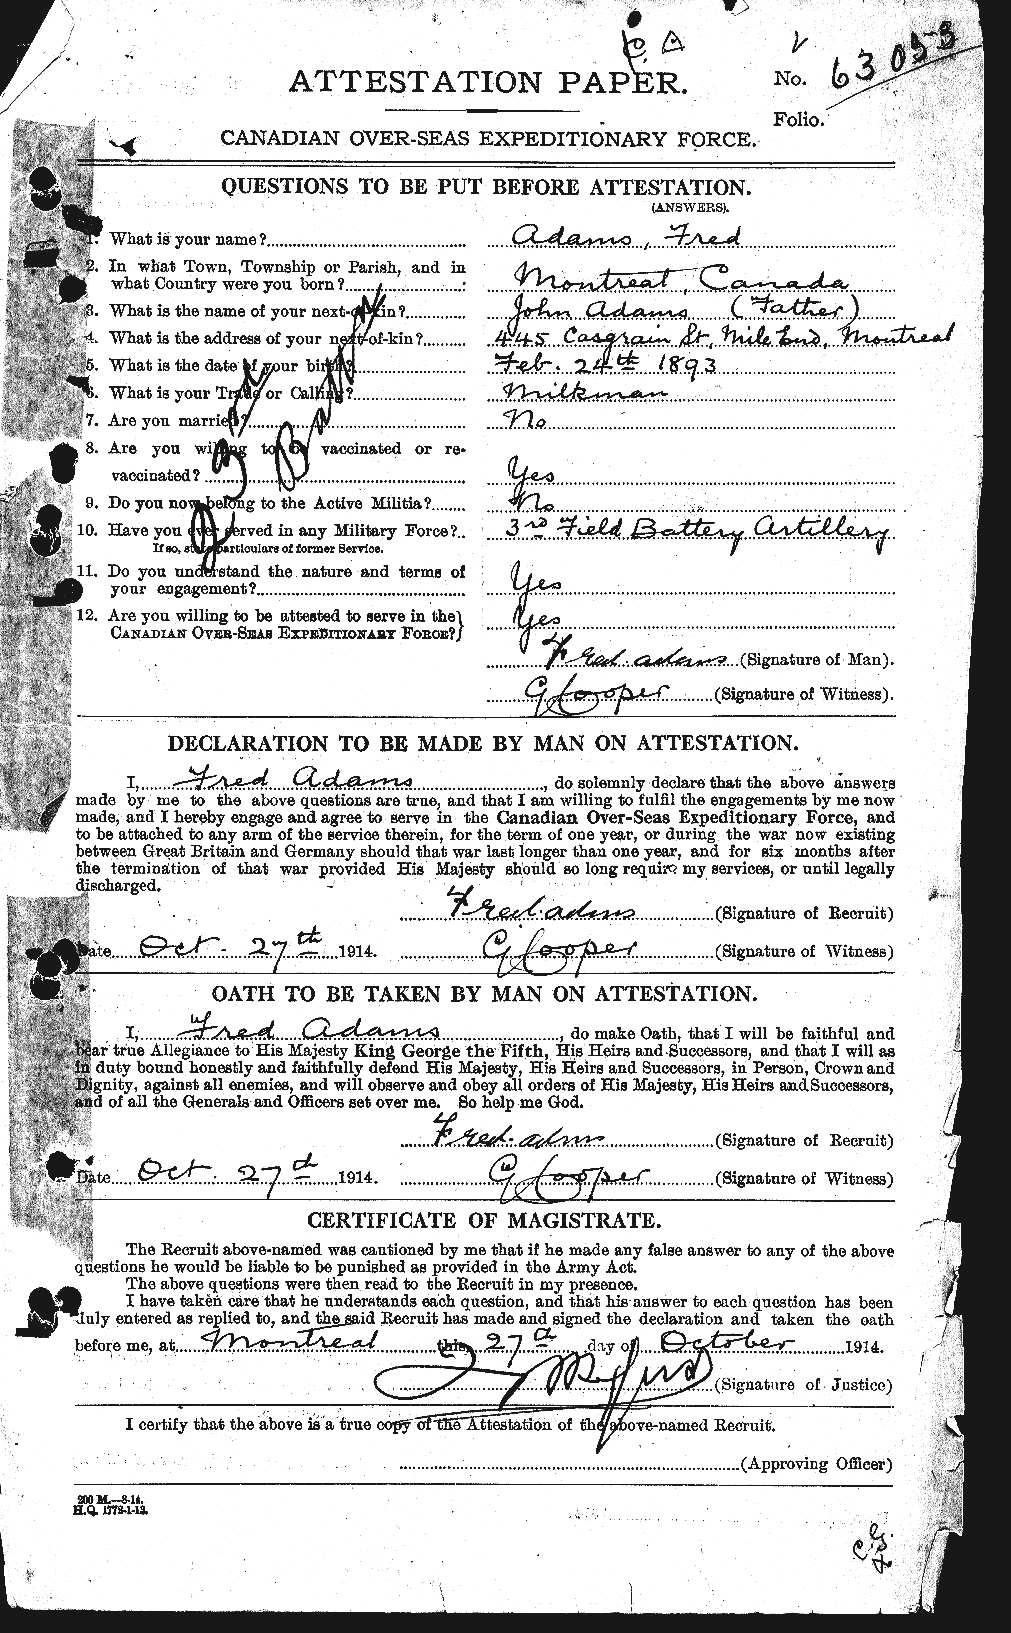 Personnel Records of the First World War - CEF 202677a